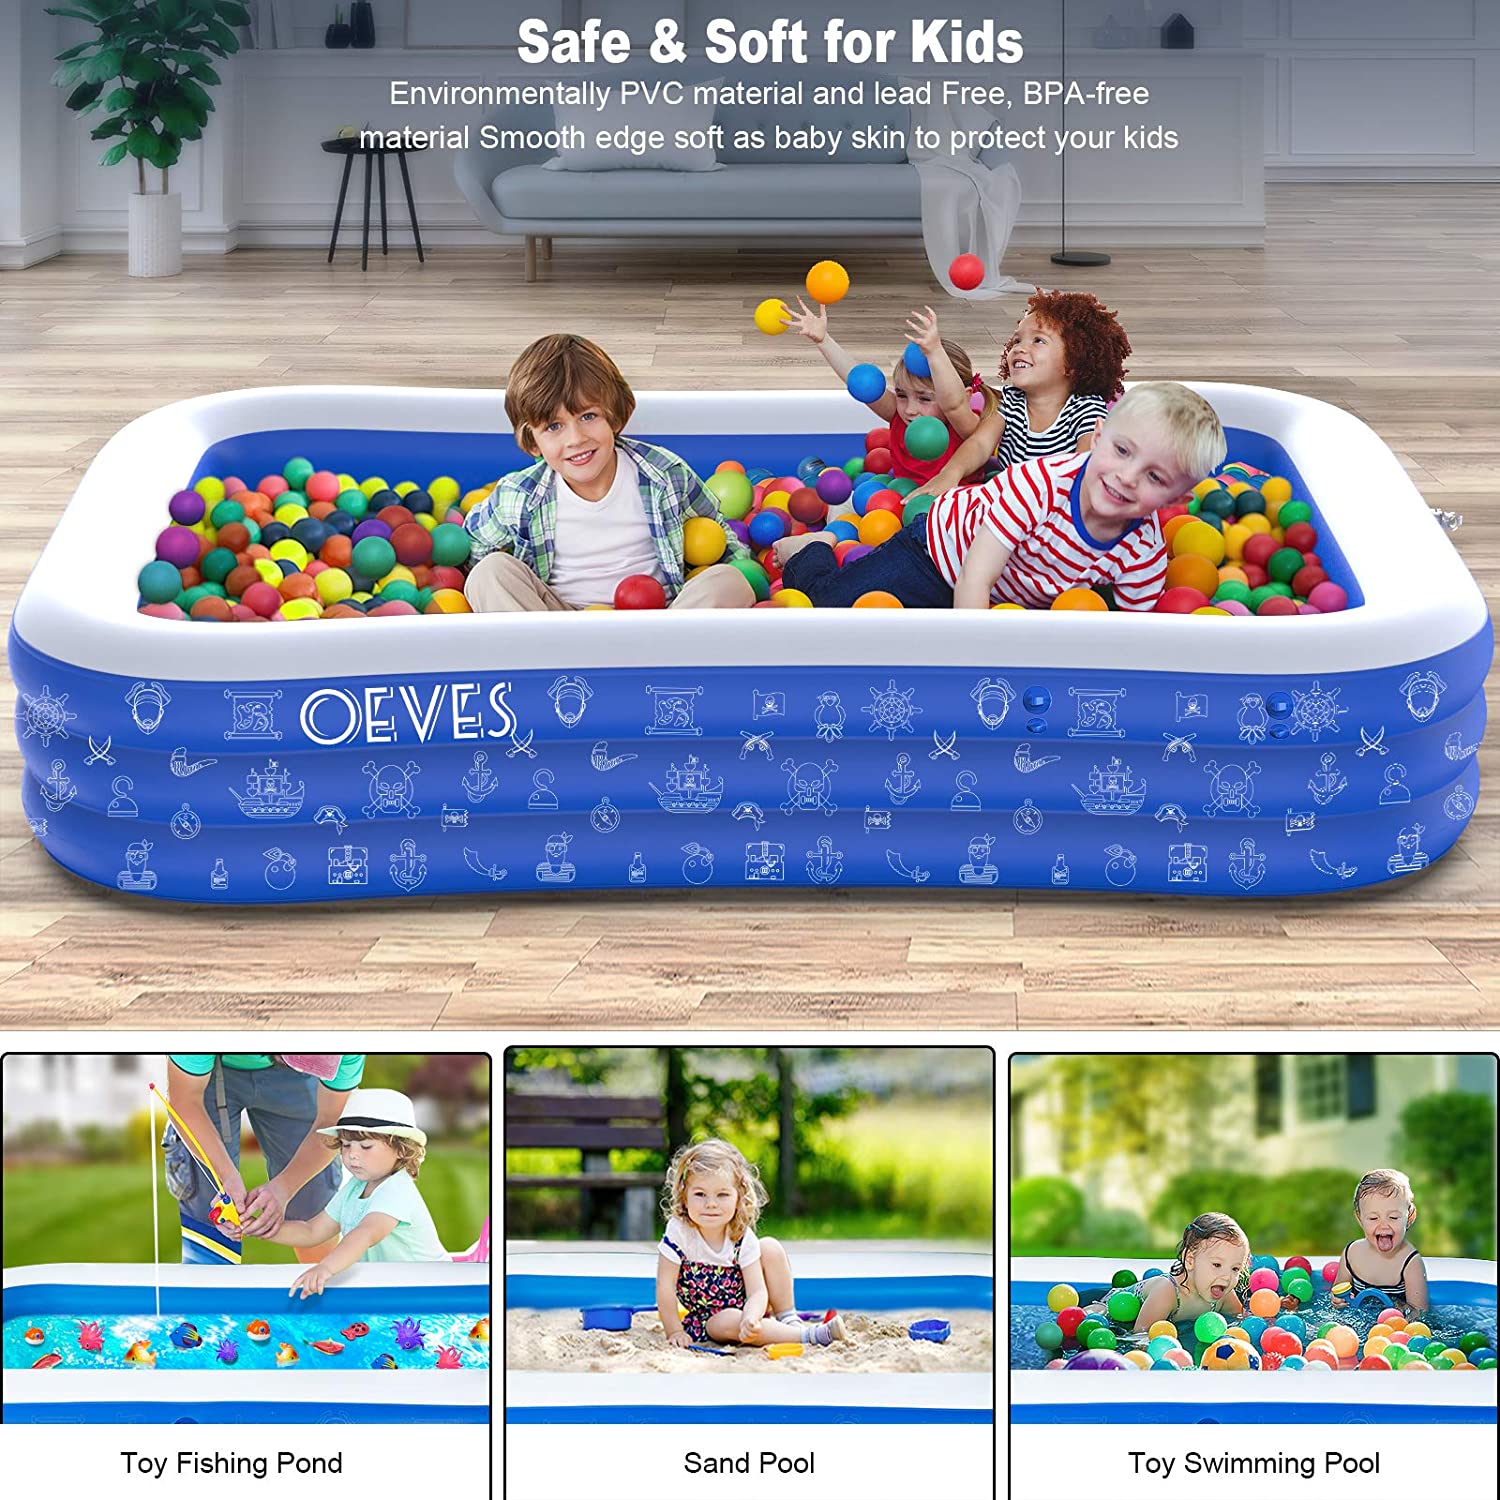 https://discounttoday.net/wp-content/uploads/2022/07/OEVES-Inflatable-Swimming-Pool-for-Kids-and-Adults-Full-Sized-Family-Kiddie-Blow-up-Swim-Pools-with-Canopy-Portable-Backyard-Summer-Water-Party-Outdoor-Indoor-Garden-Lounge-Outside-Ages-3-Toddlers4.jpg